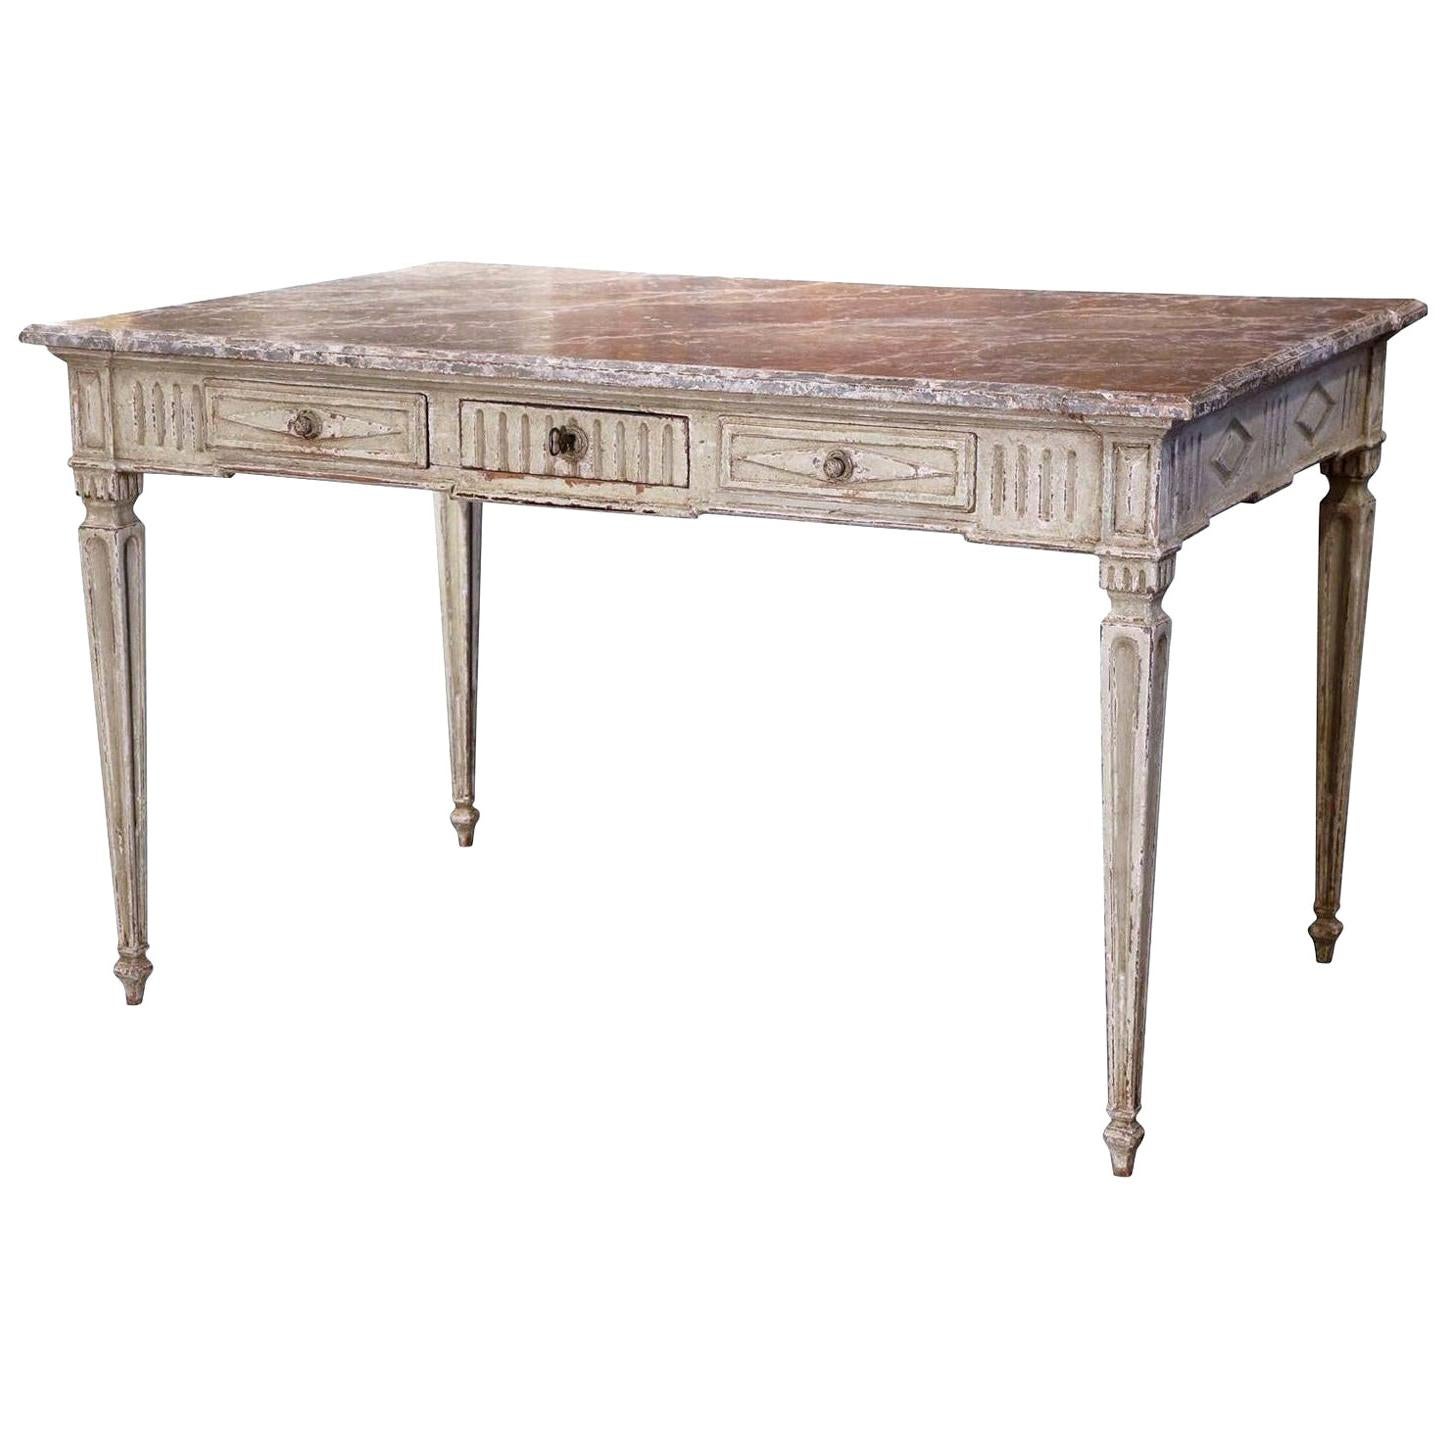 19th Century French Louis XVI Painted Writing Table Desk with Faux Marble Top